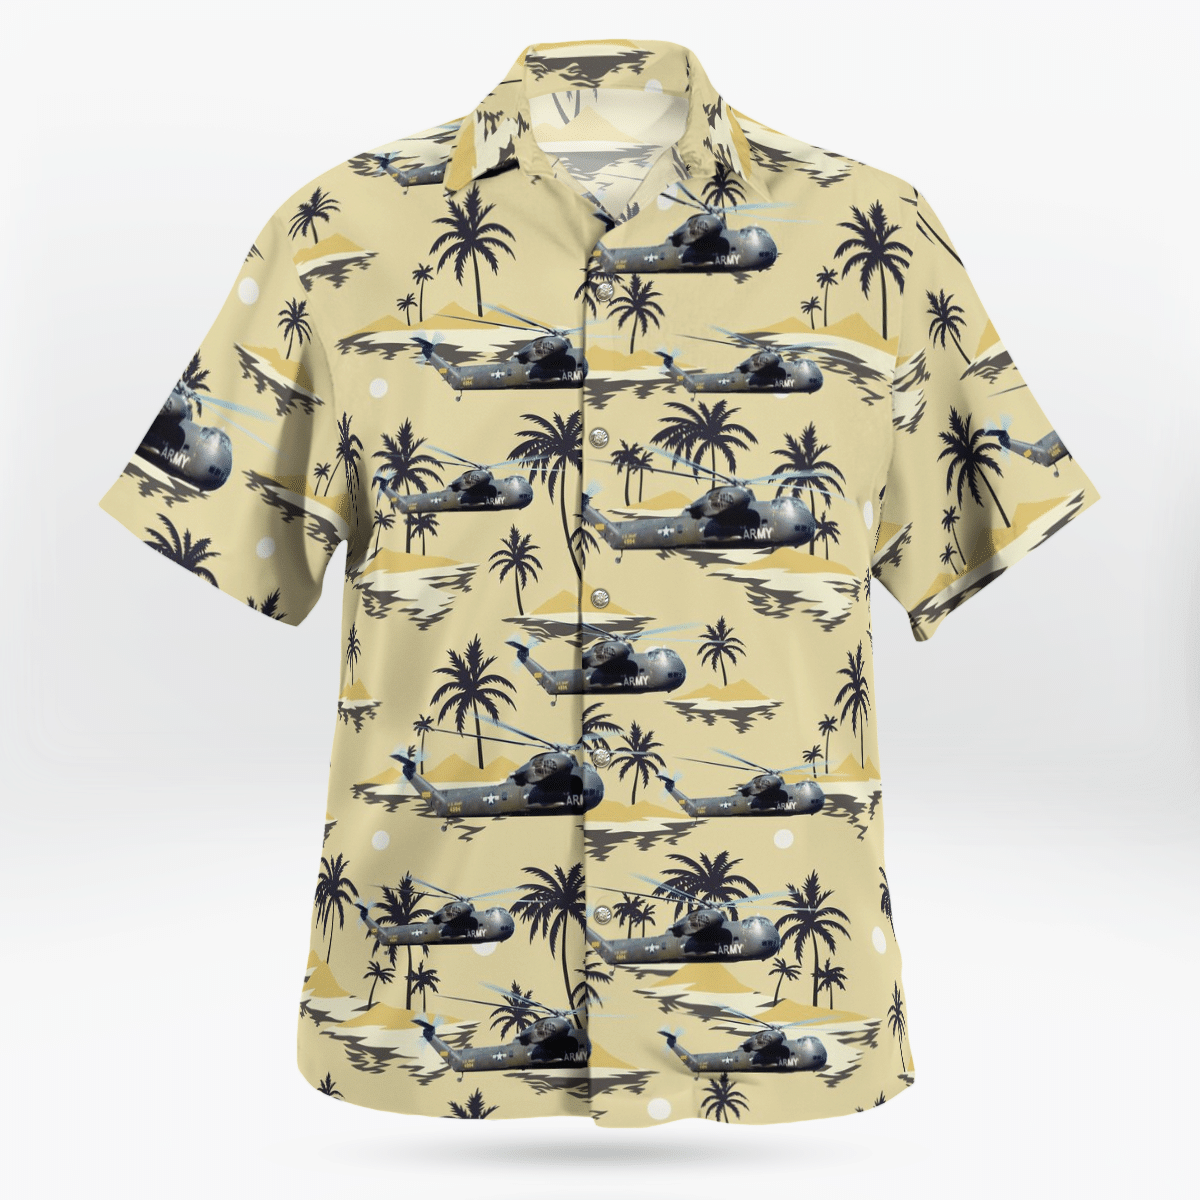 HOT United States Army Aviation Museum Sikorsky CH-37B Mojave Tropical Shirt1